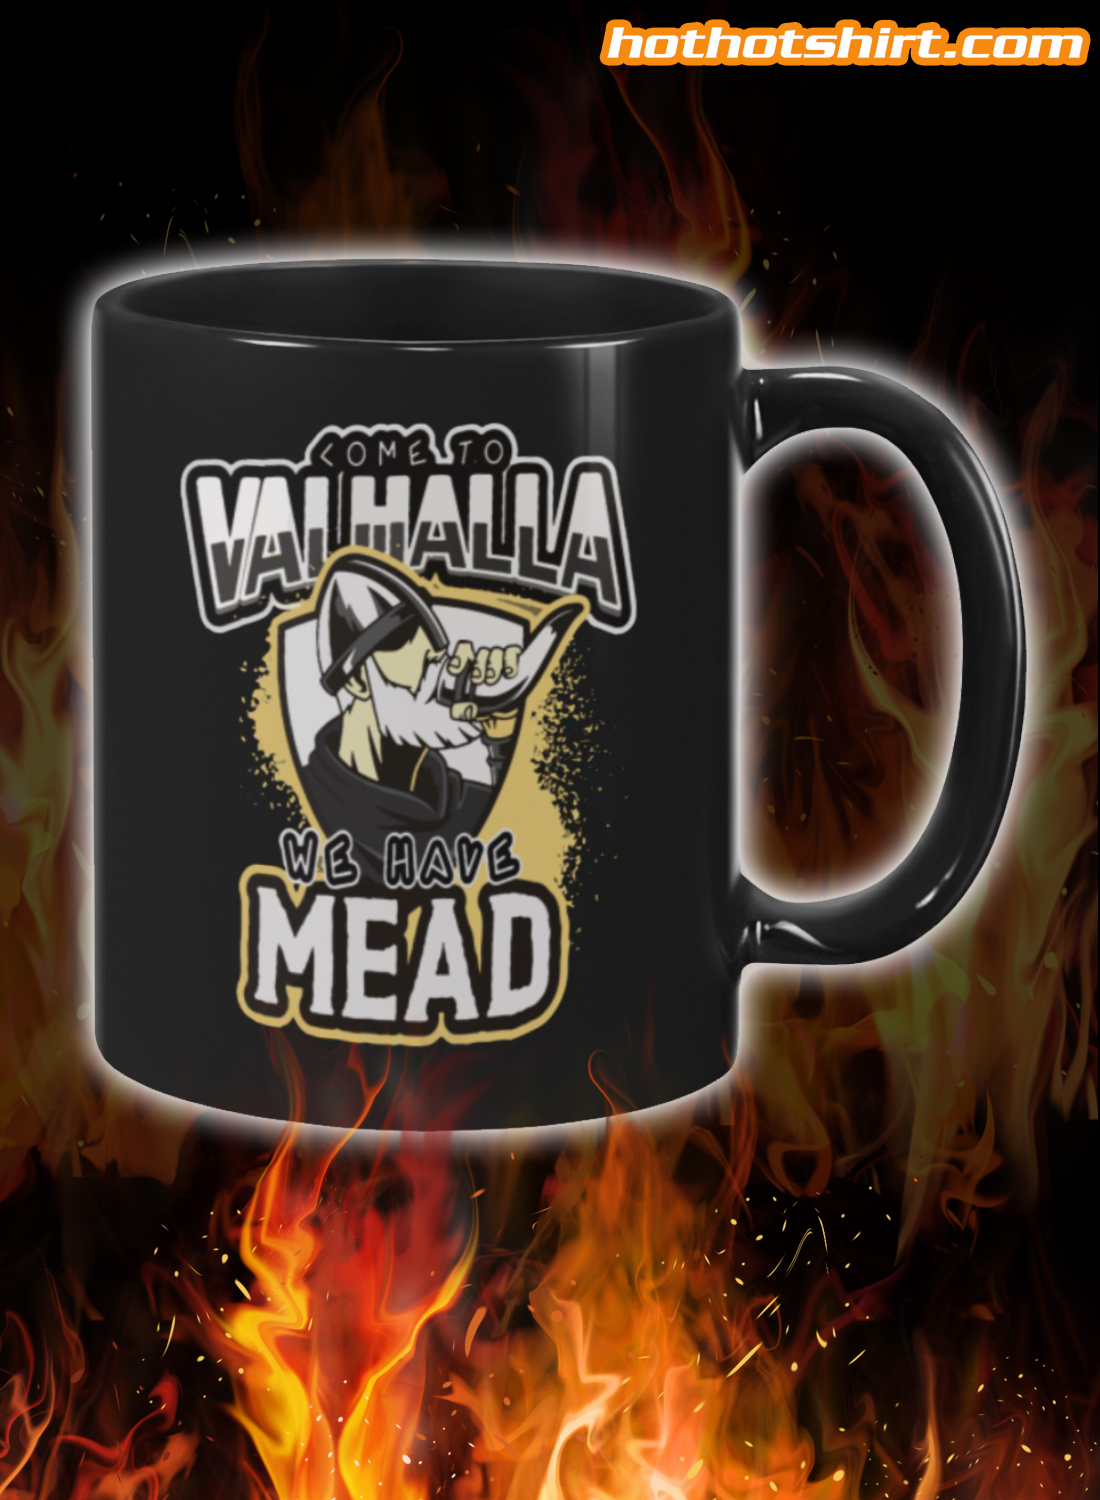 Come to valhalla we have mead mug 2